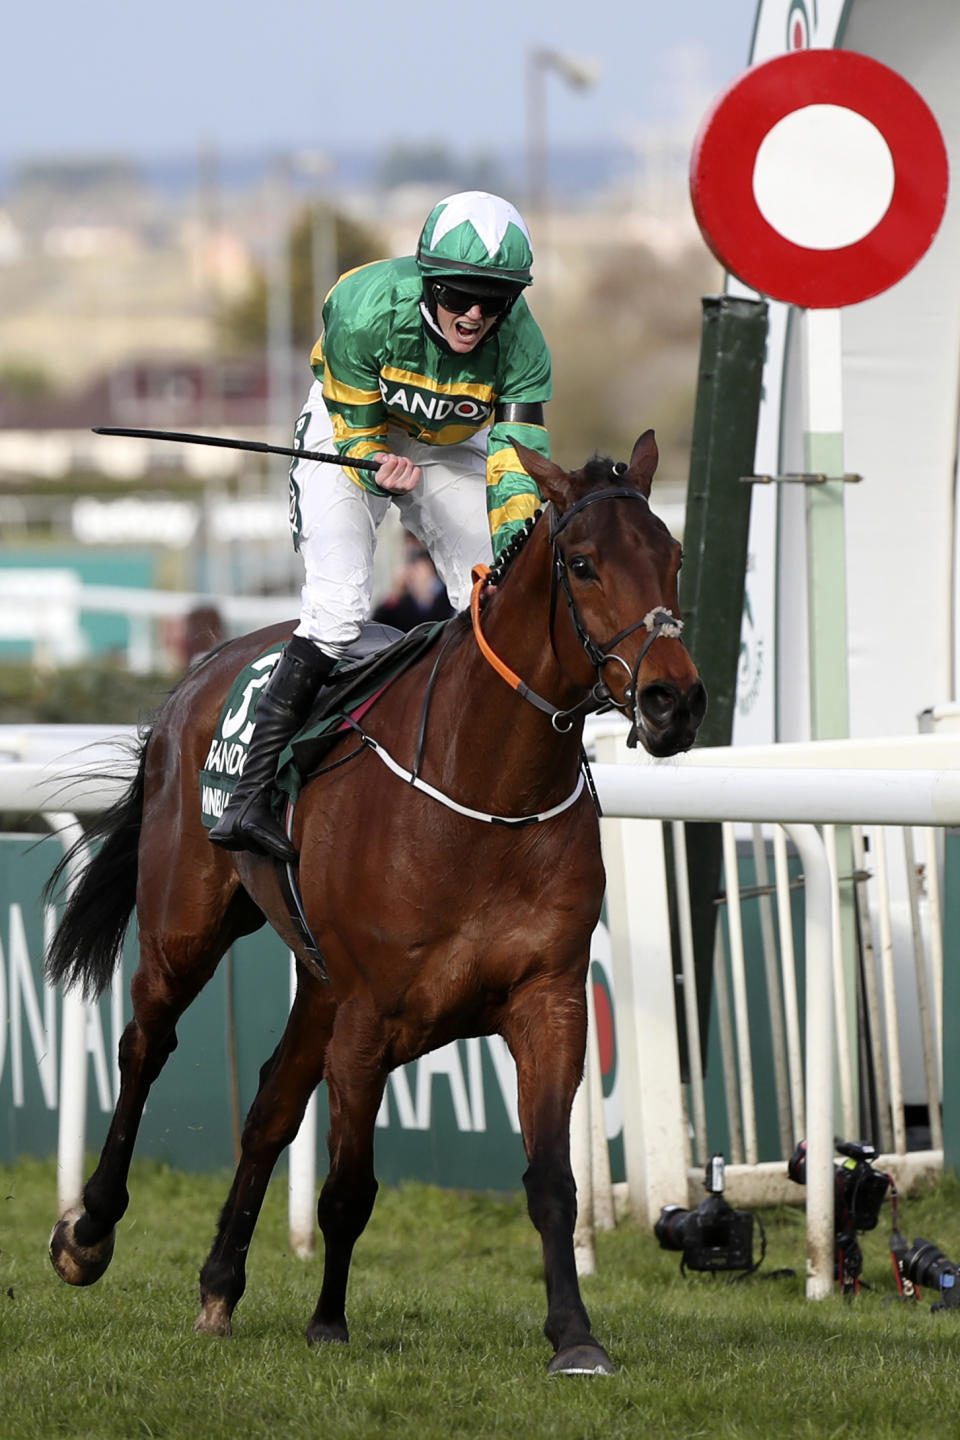 Rachael Blackmore ridding Minella Times wins the Randox Grand National Handicap Chase on the third day of the Grand National Horse Racing meeting at Aintree racecourse, near Liverpool, England, Saturday April 10, 2021. (AP Photo/Scott Heppell, Pool)